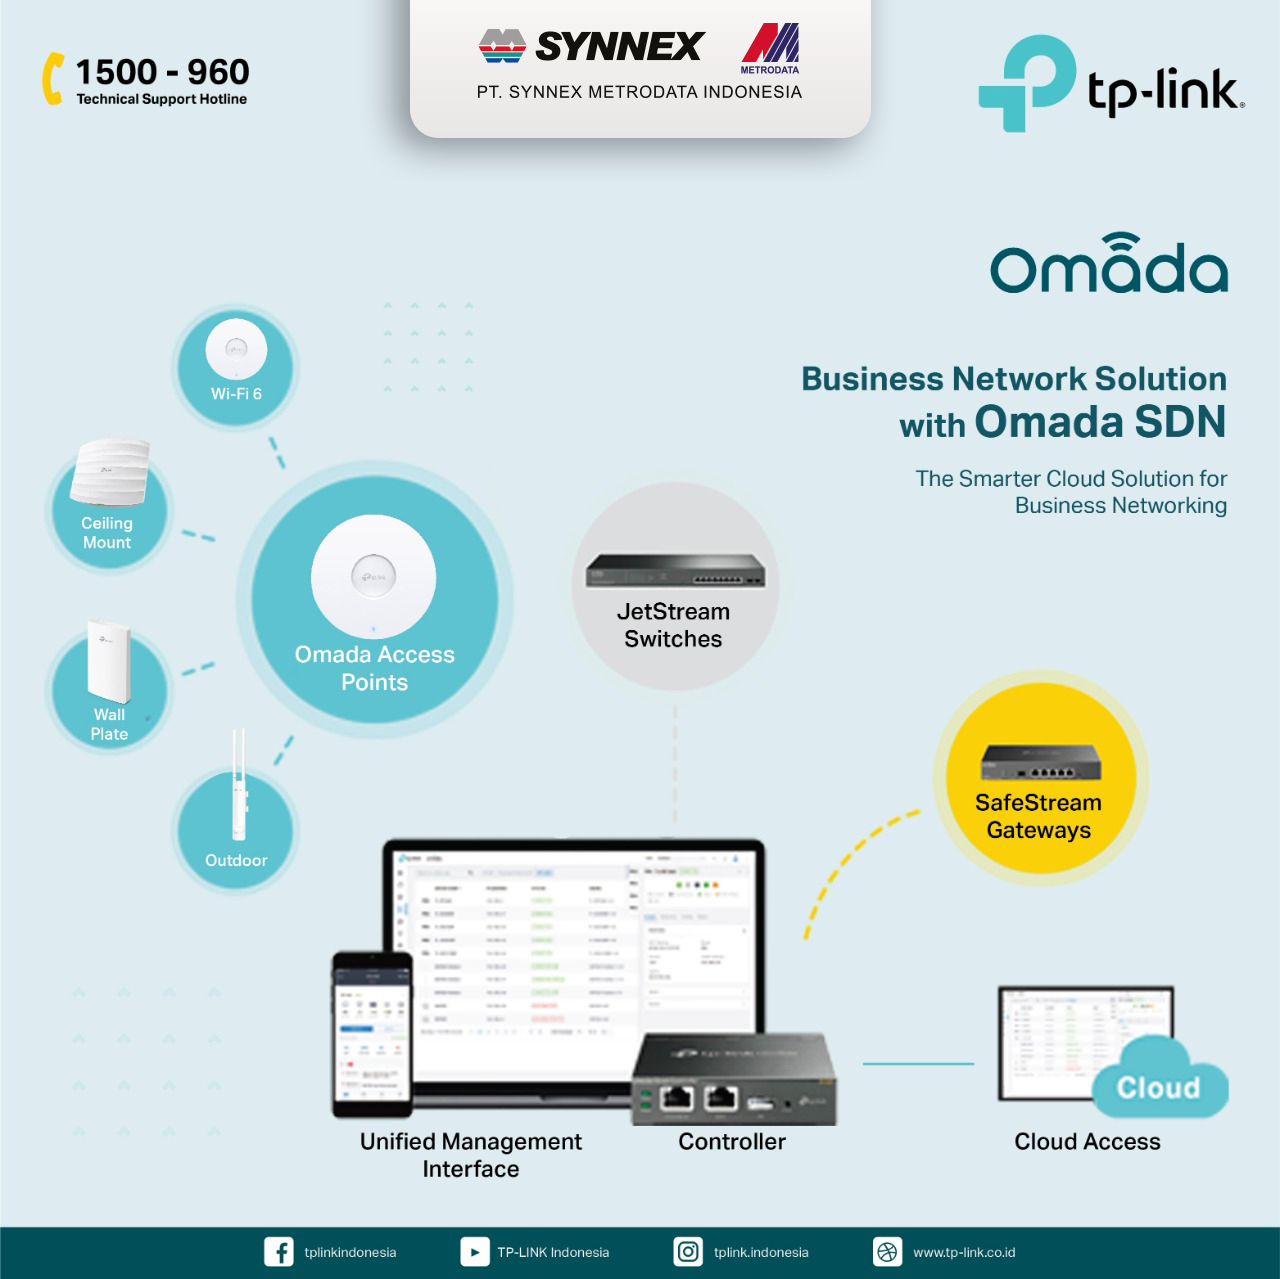 https://www.synnexmetrodata.com/wp-content/uploads/2021/11/Tp-Link-Business-Network-Solution-with-Omada-SDN-1.jpg